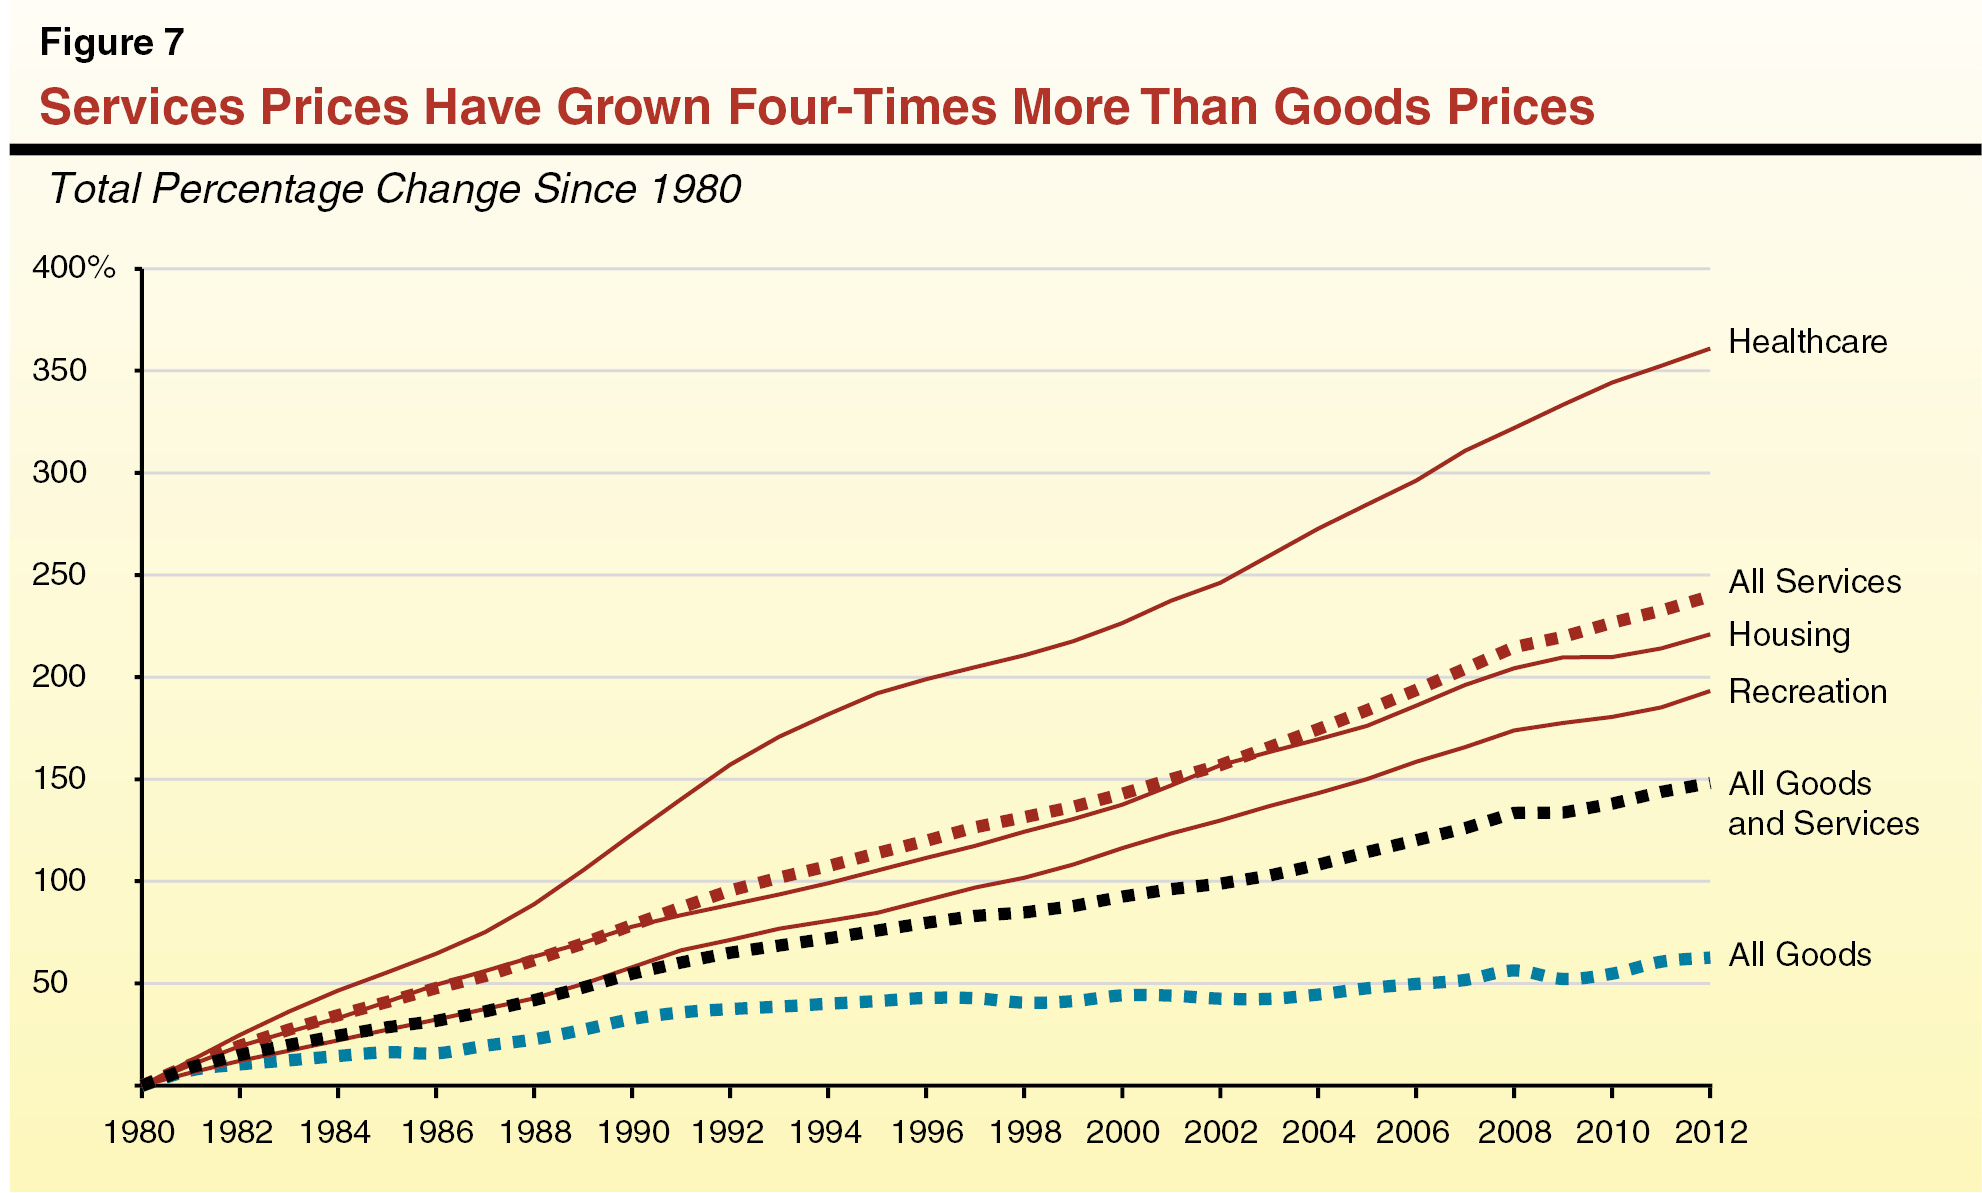 Service prices have grown four-times more than goods prices